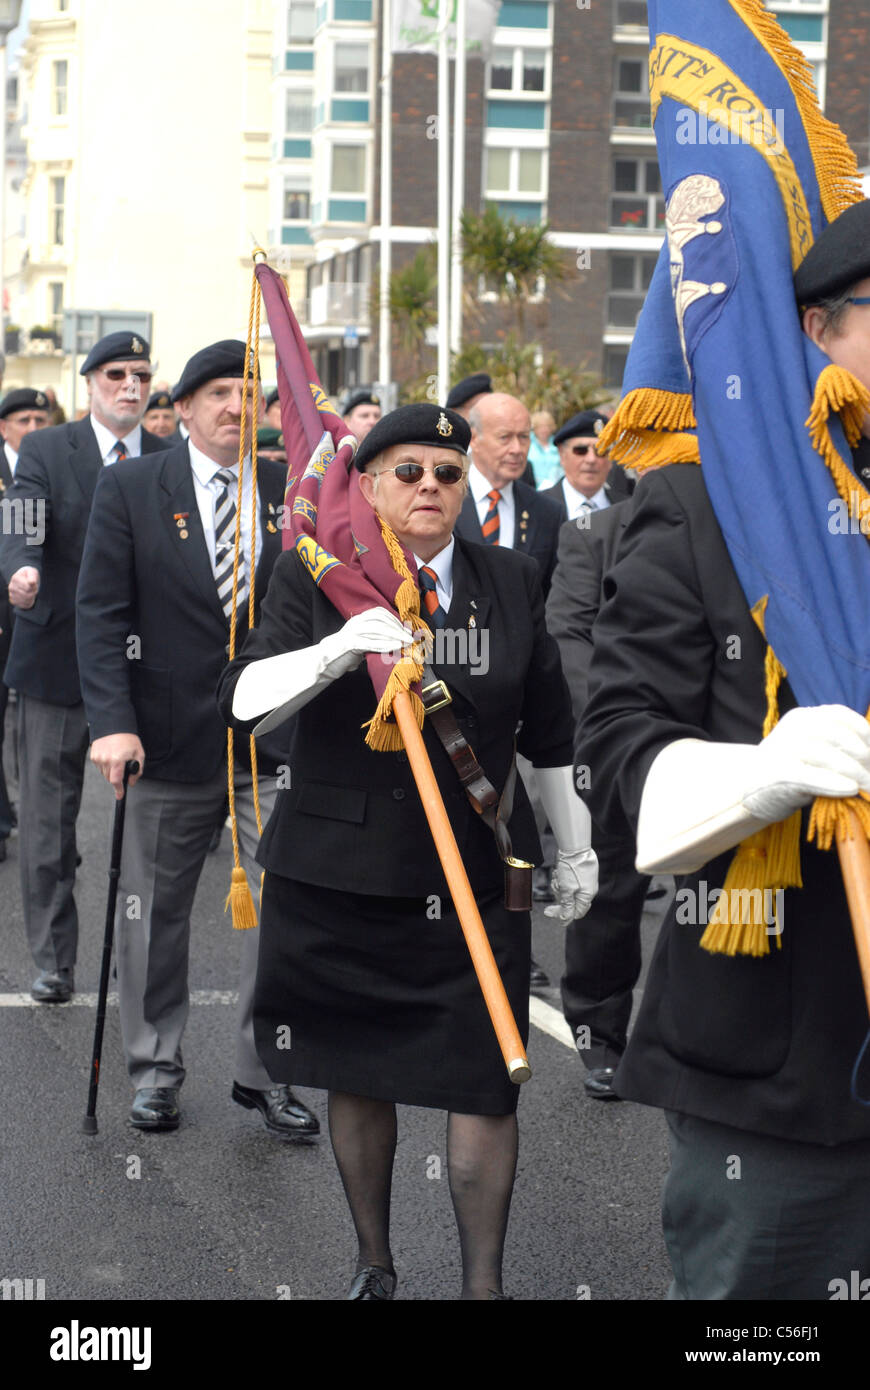 World War Two veterans march with soldiers of the 2nd Battalion The Princess of Wales's Royal Regiment  parade in Brighton. UK. Stock Photo